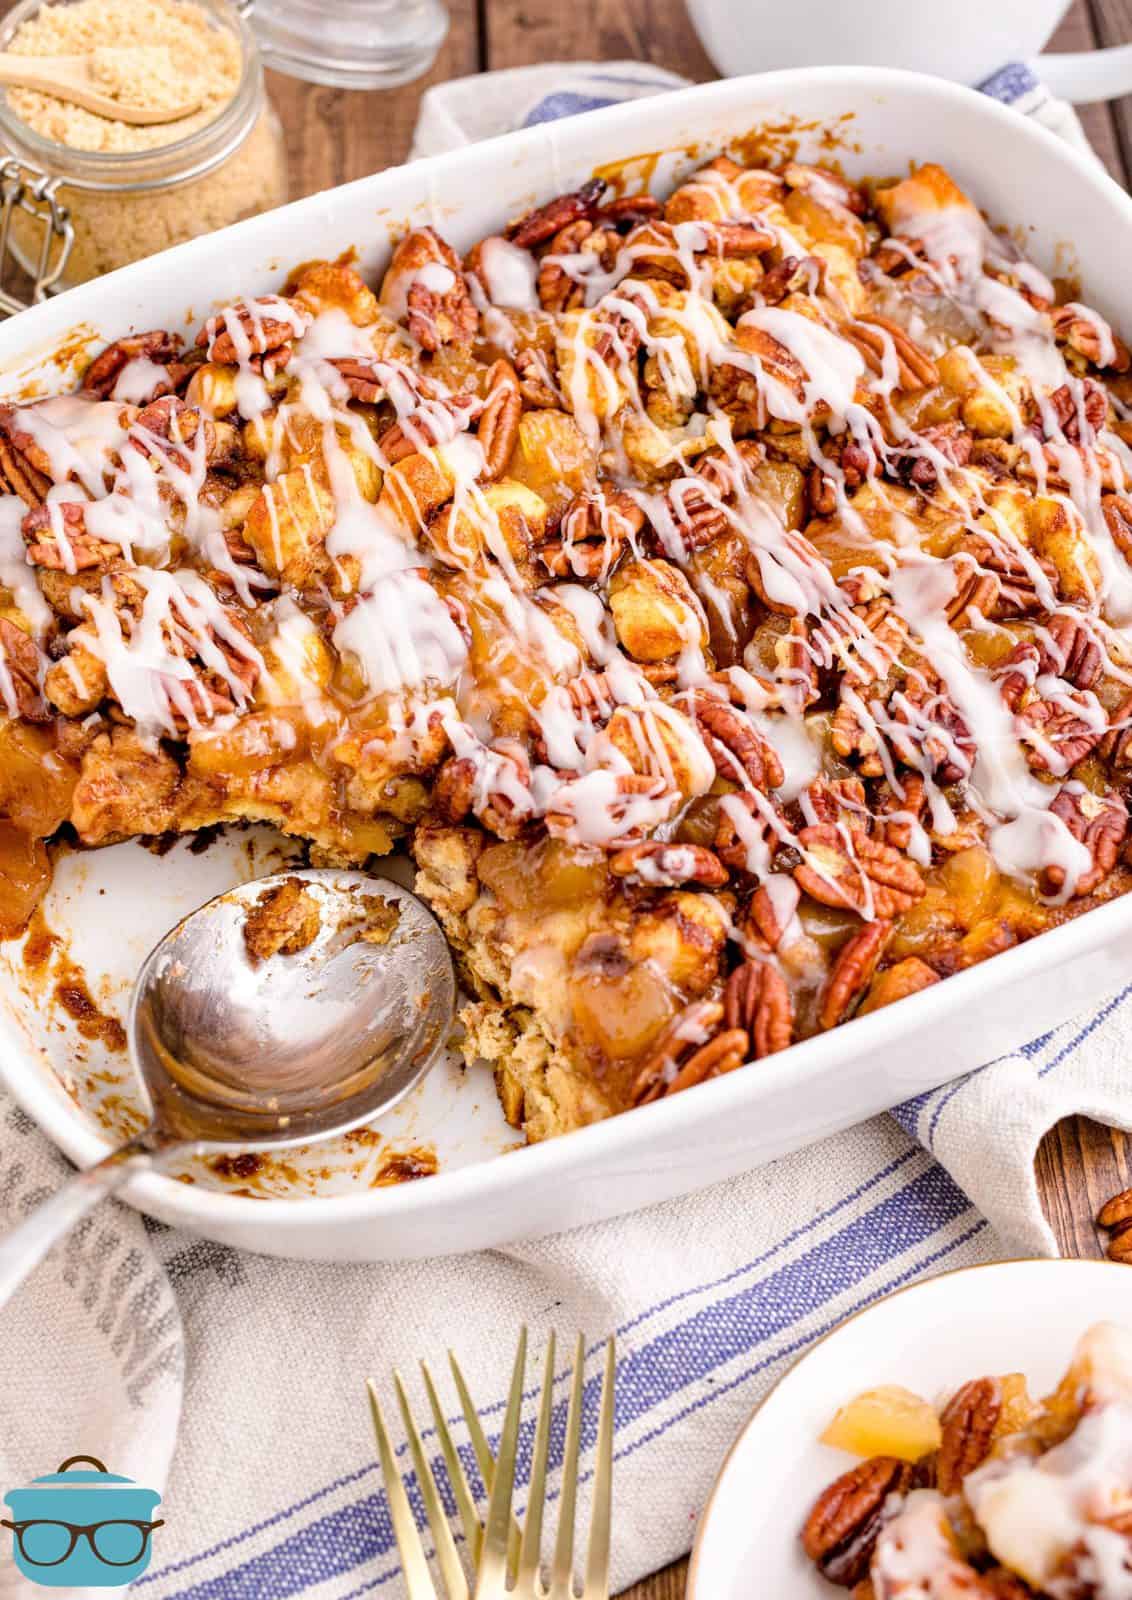 Cinnamon Roll Casserole in casserole dish with some missing with serving spoon in dish.